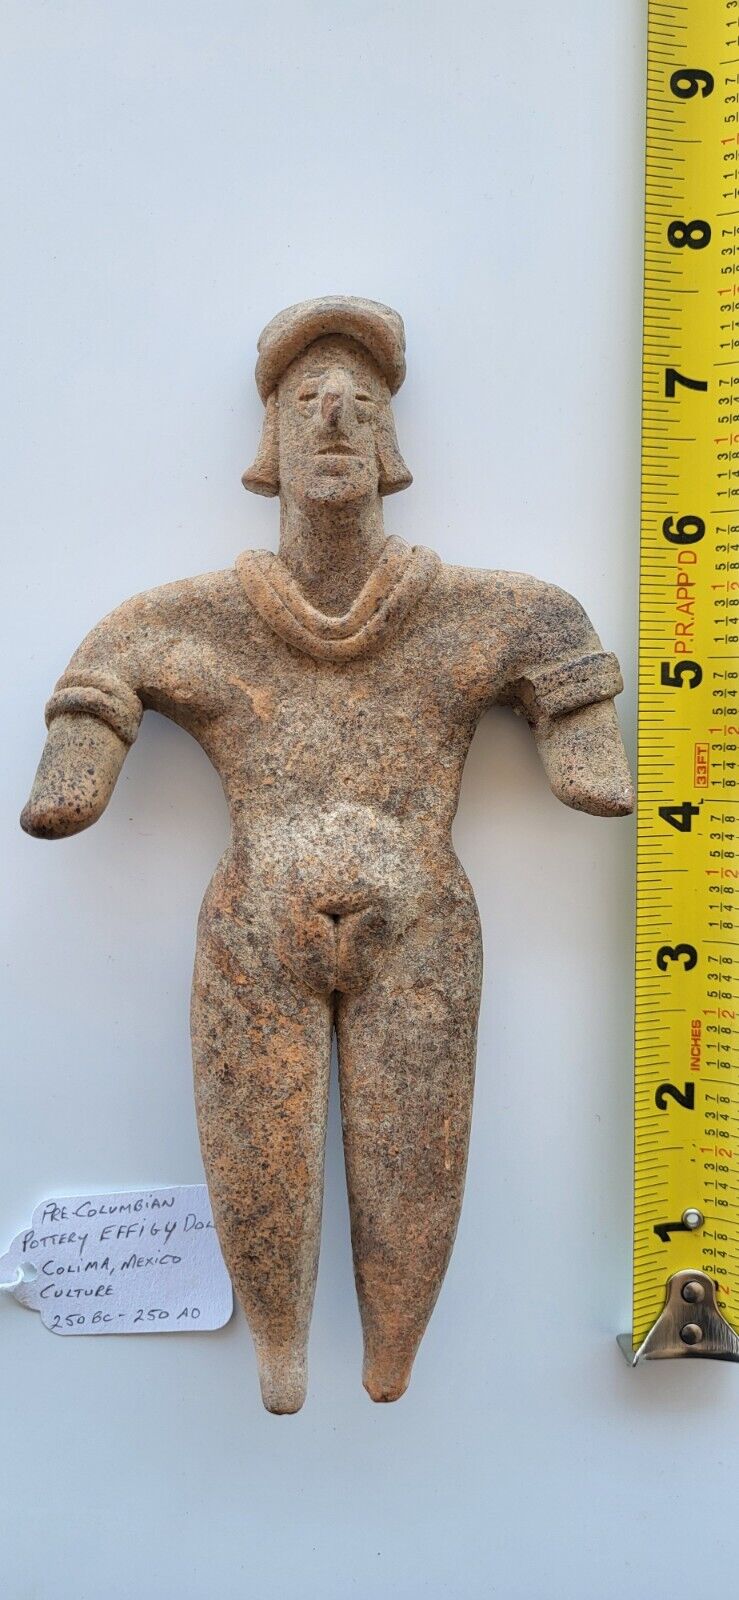 PRE COLUMBIAN Colima Pottery Flat Effigy Figure 250BC to 250AD #4